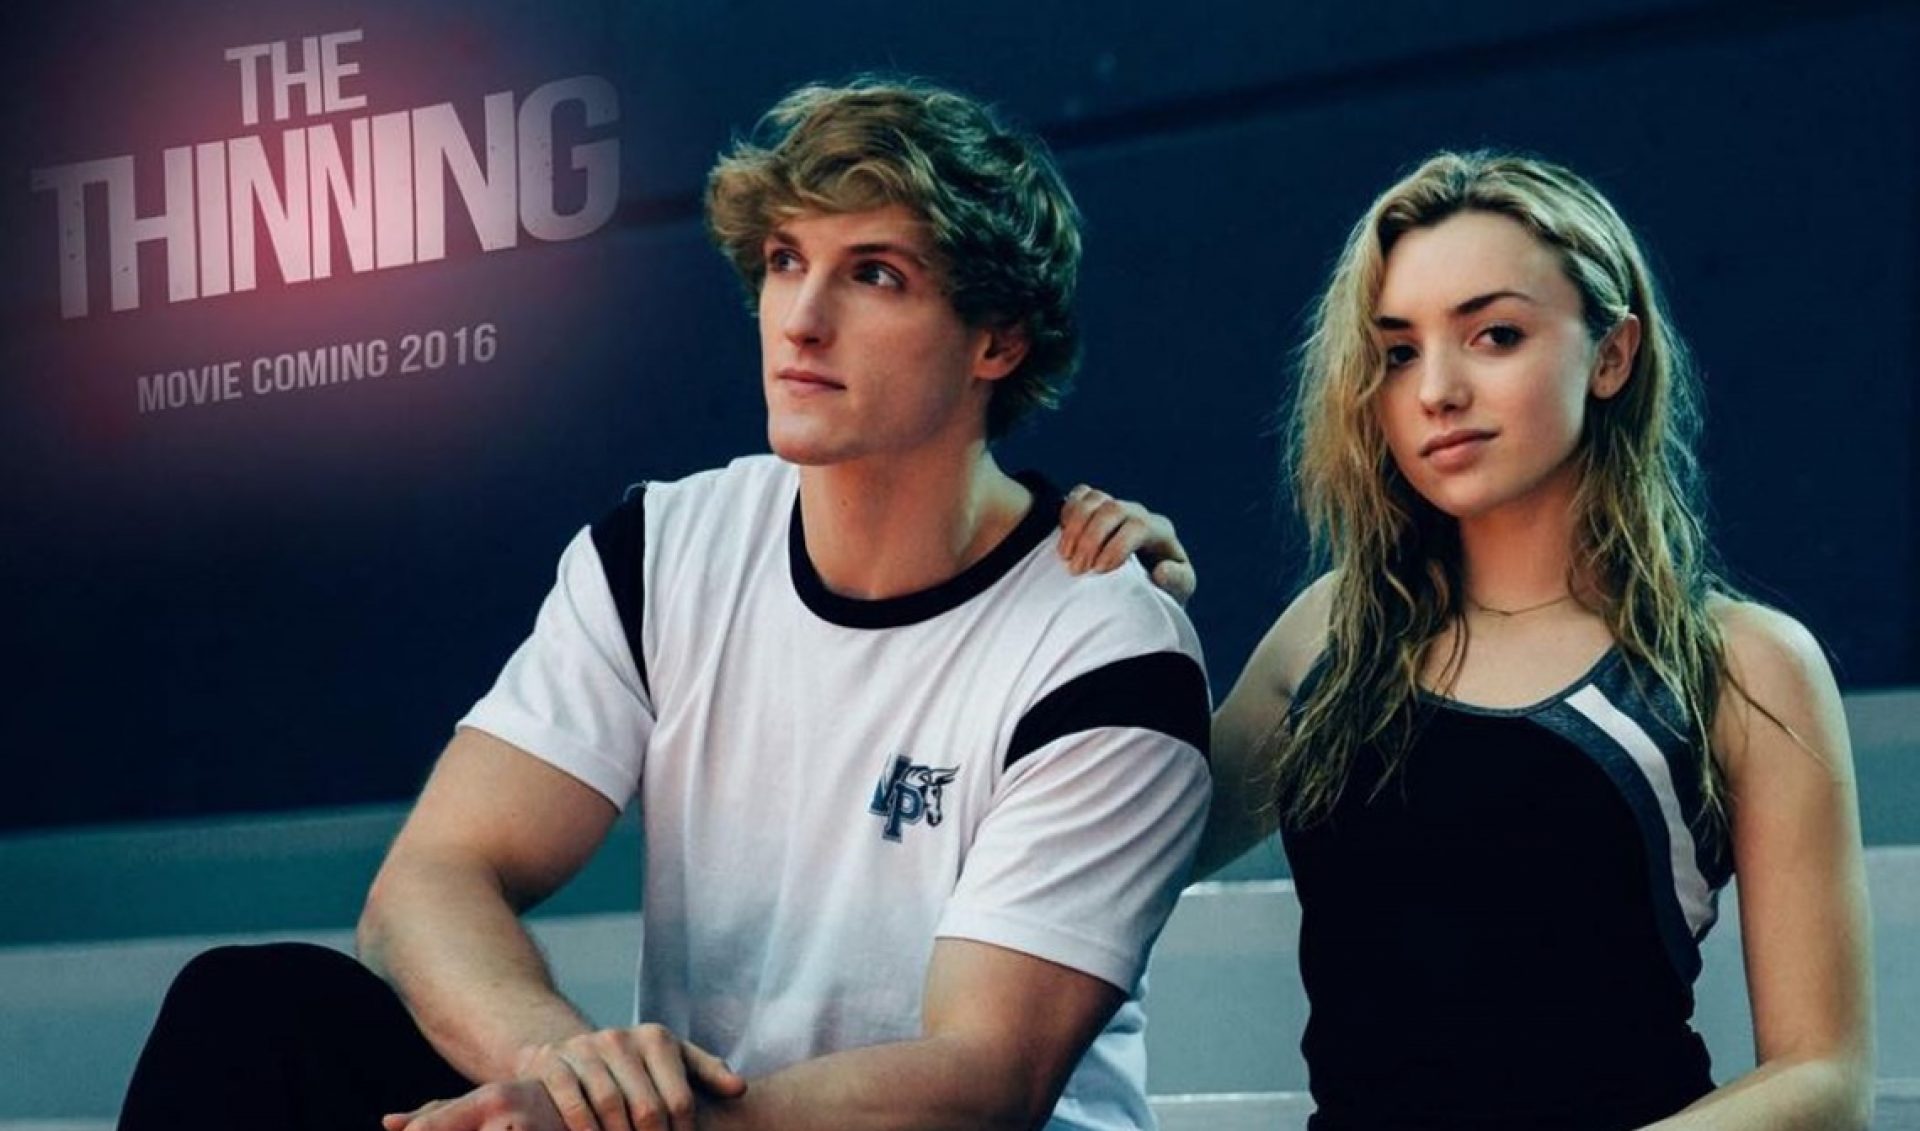 Logan Paul-Starring ‘The Thinning’ To Be YouTube Red’s First Feature-Length Thriller